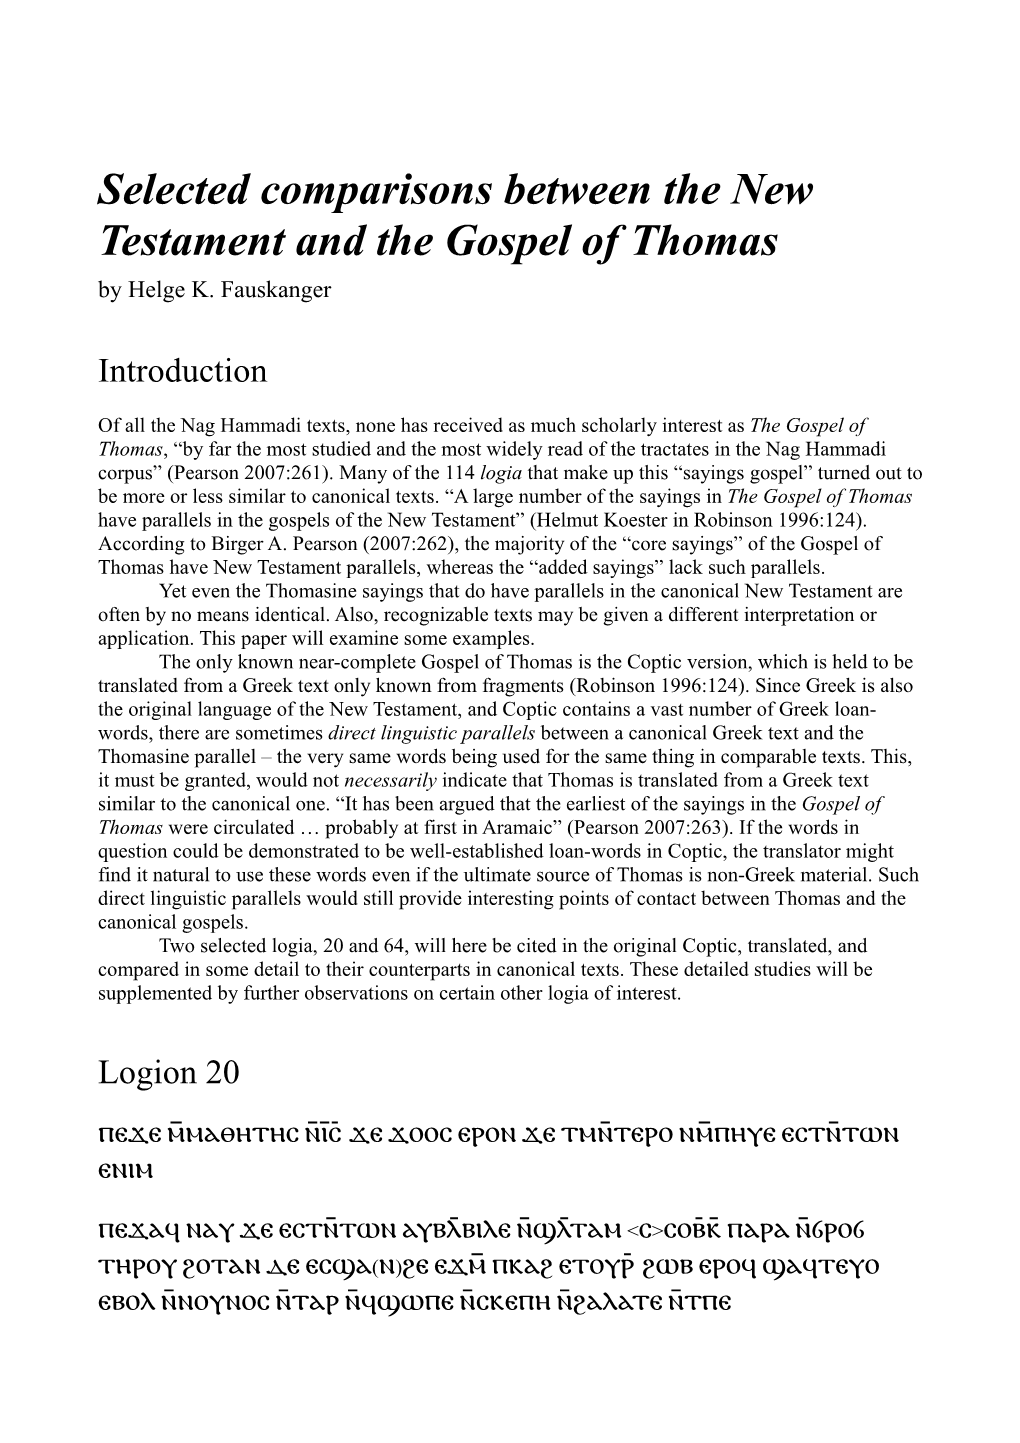 Selected Comparisons Between the New Testament and the Gospel of Thomas by Helge K